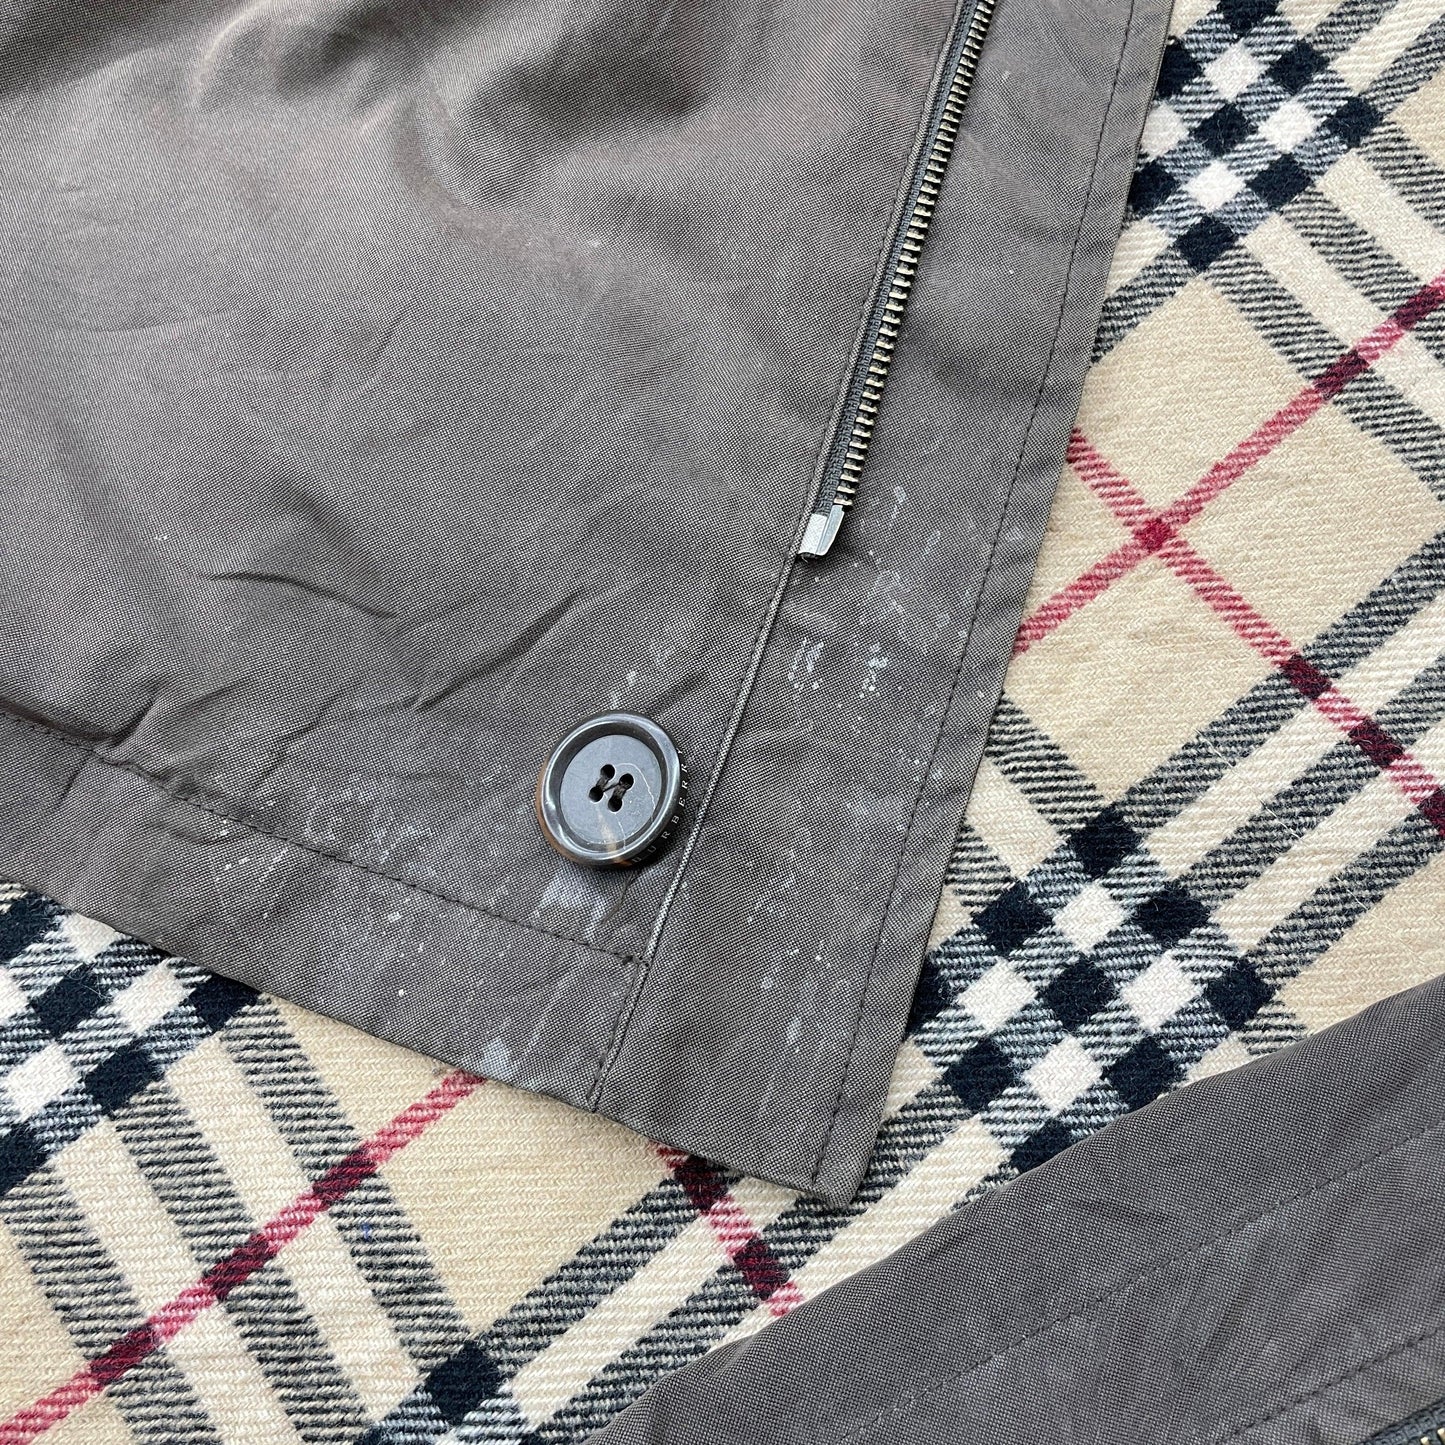 burberry jacket made in spain burberry burberrys jacket